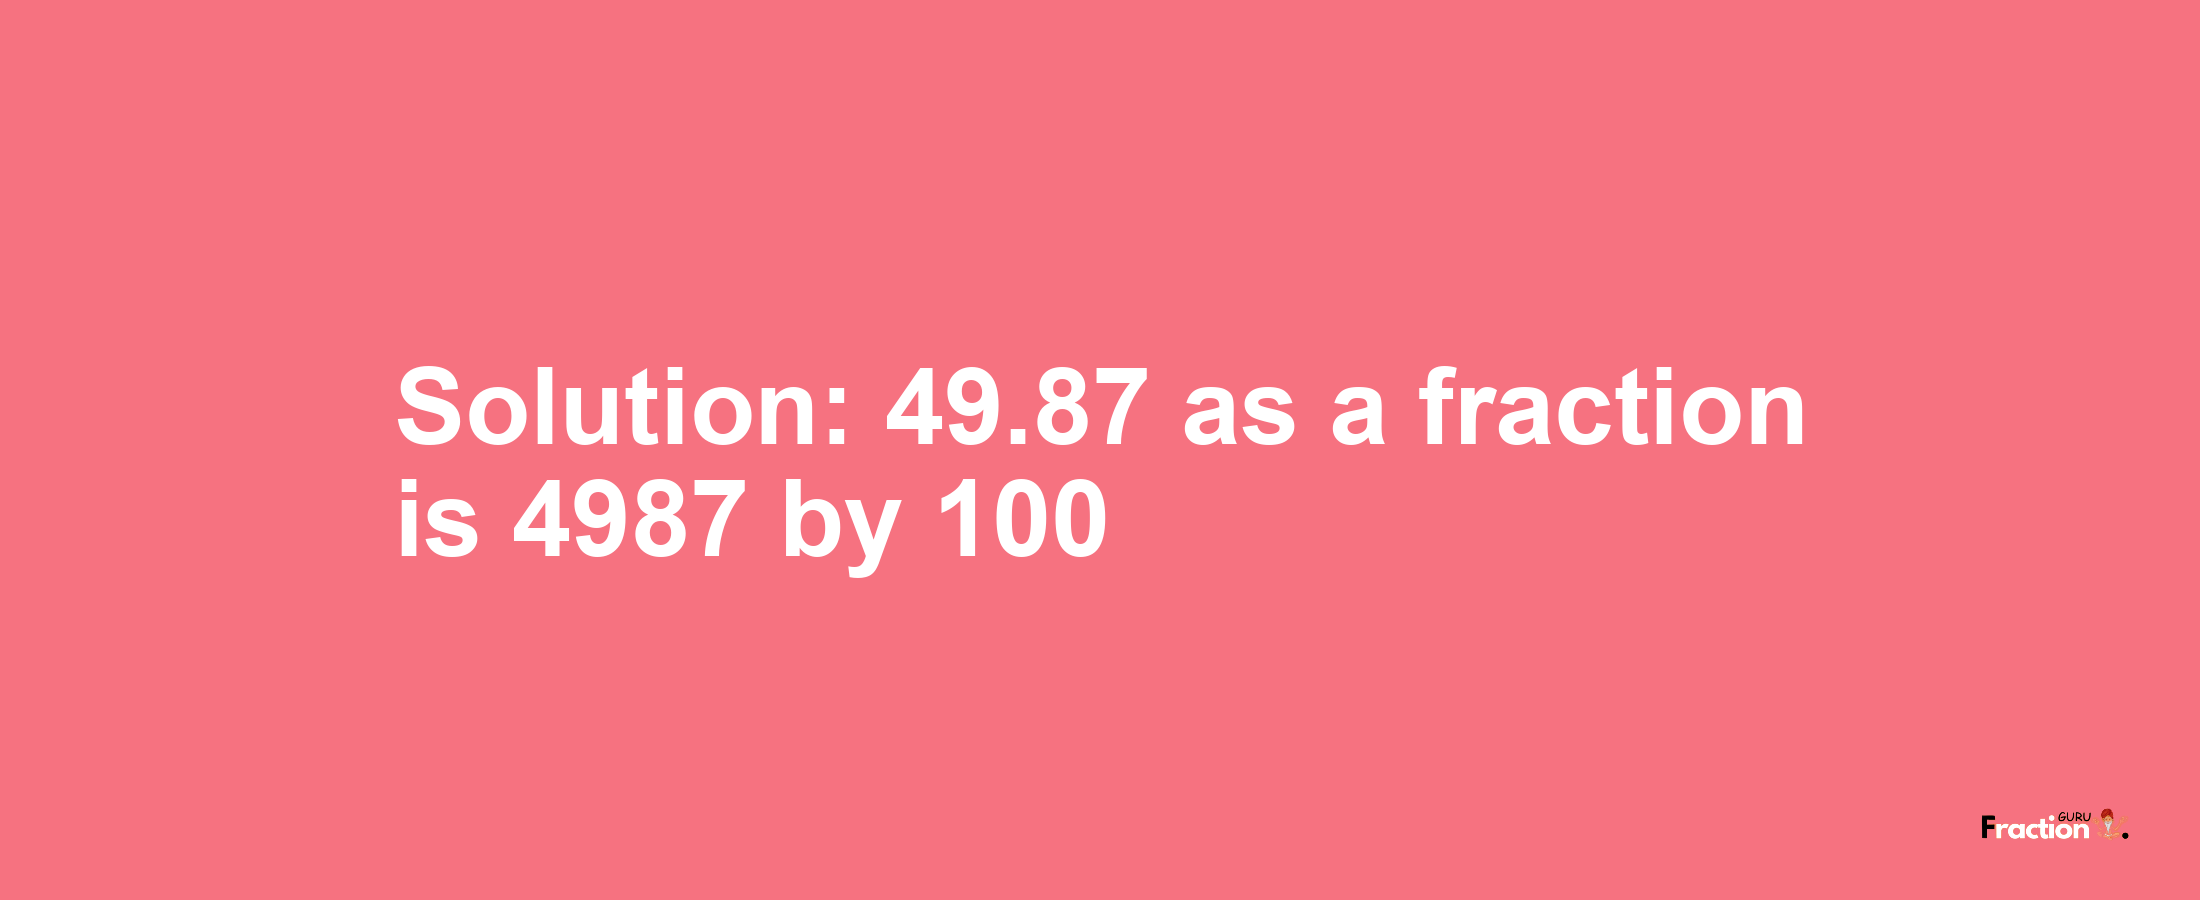 Solution:49.87 as a fraction is 4987/100